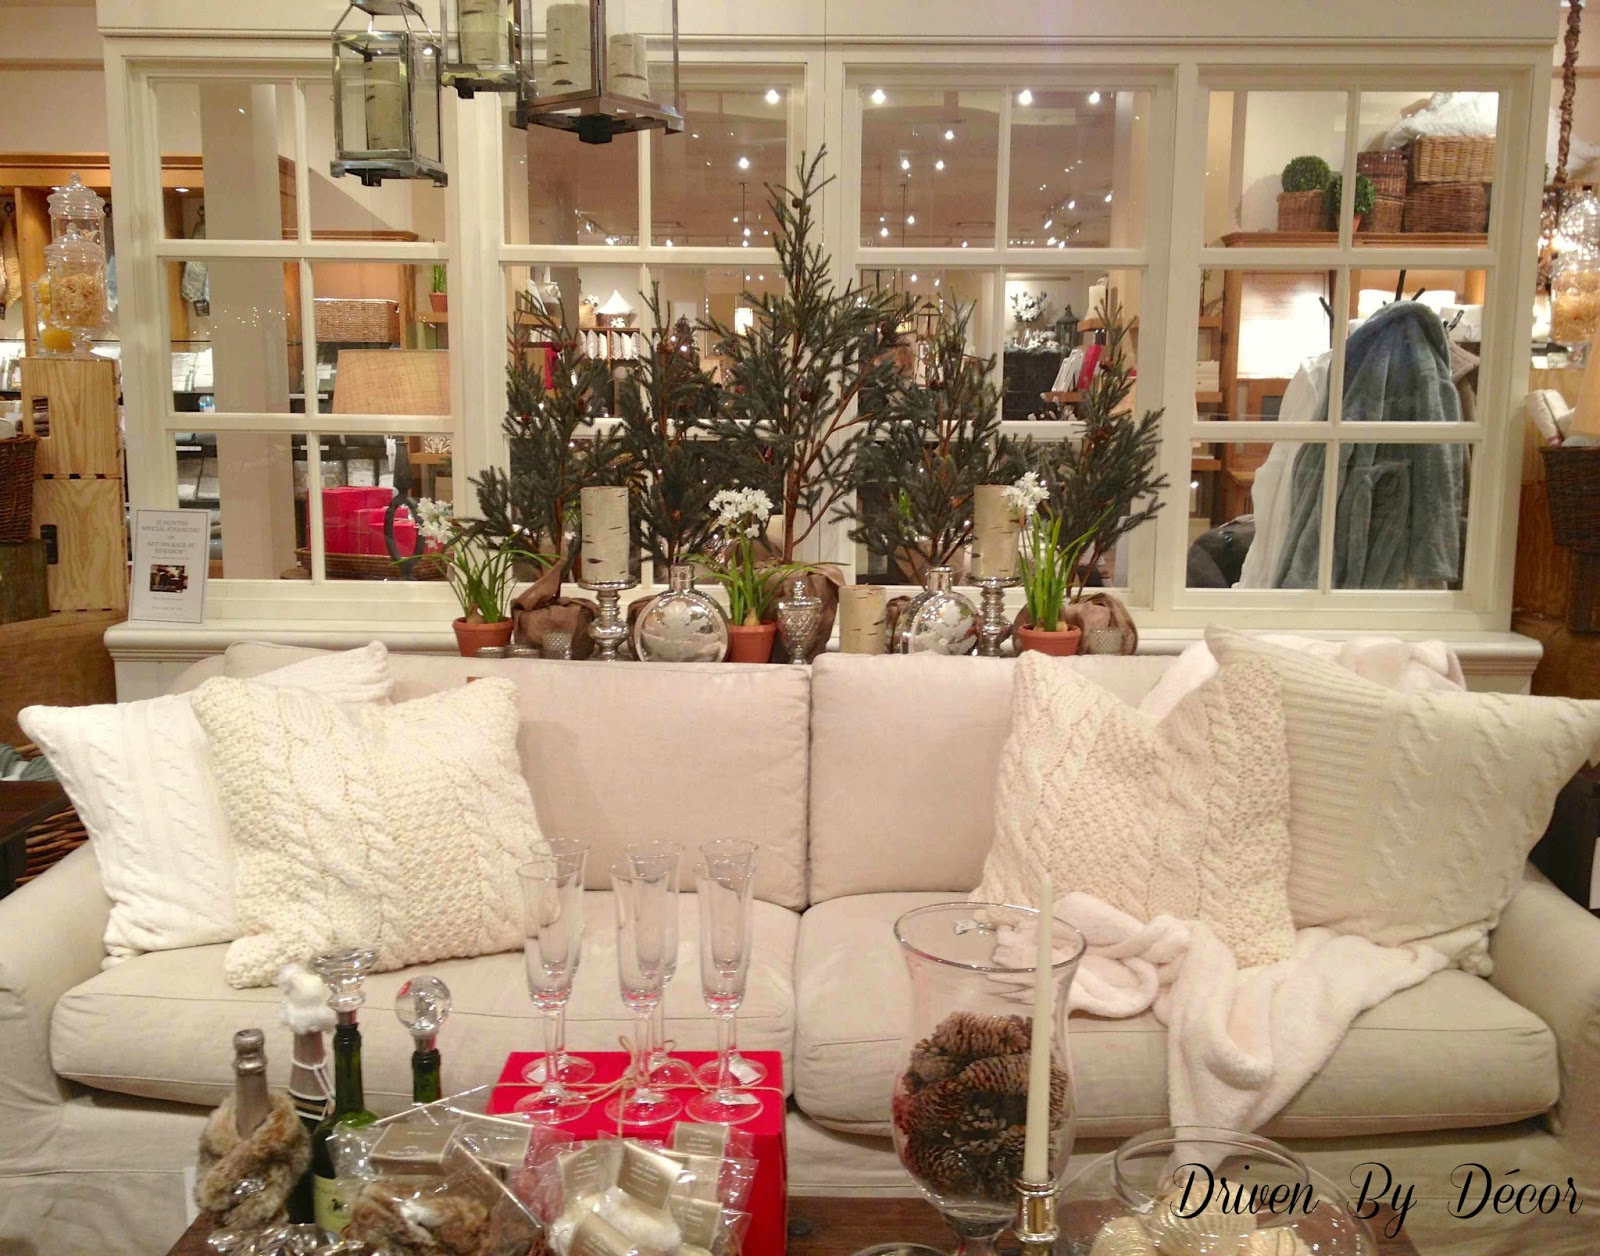 Pottery Barn's Holiday Décor  Driven by Decor